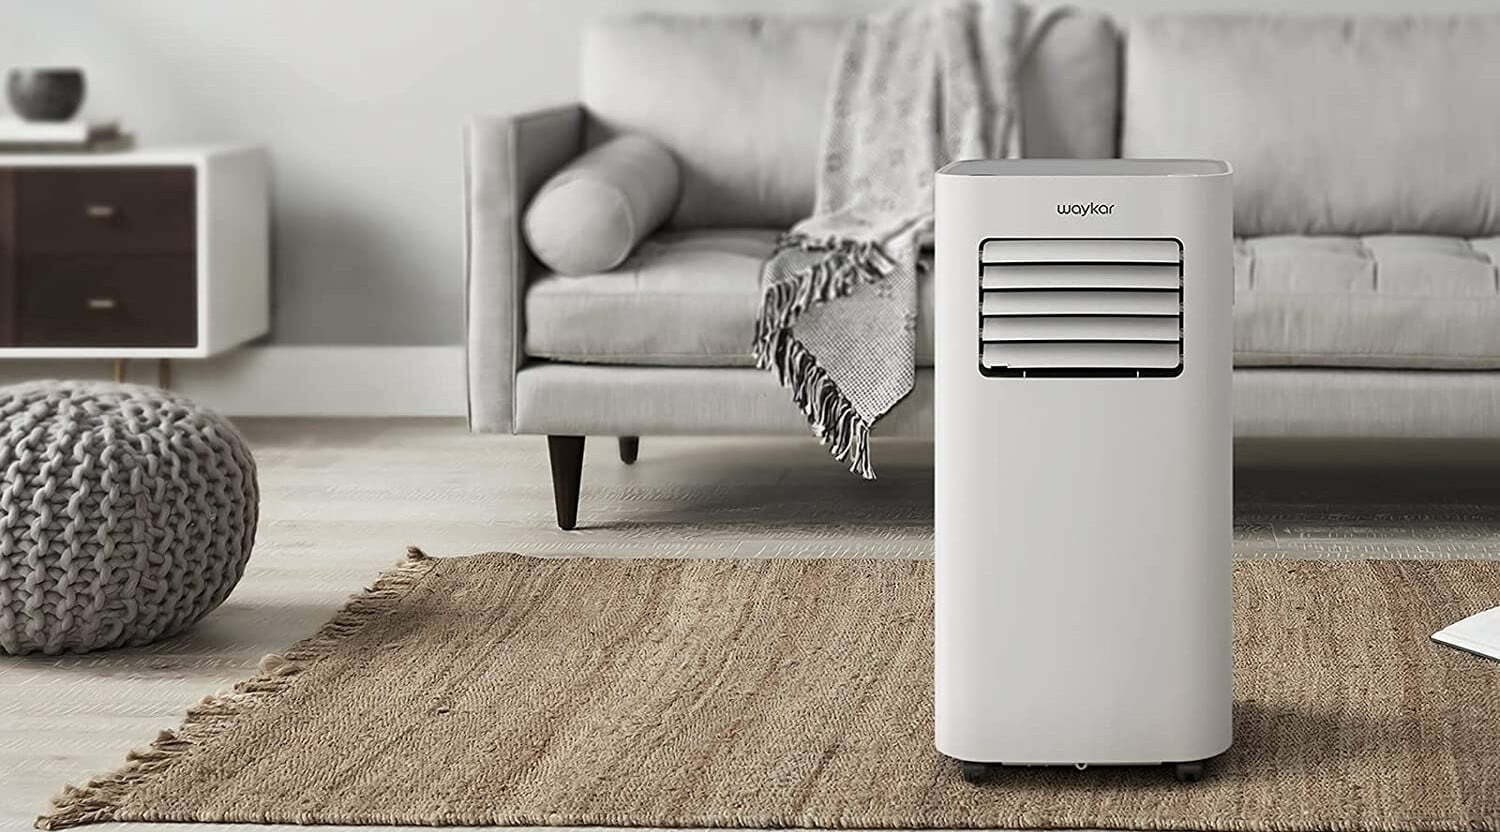 How to Use a Portable Air Conditioner